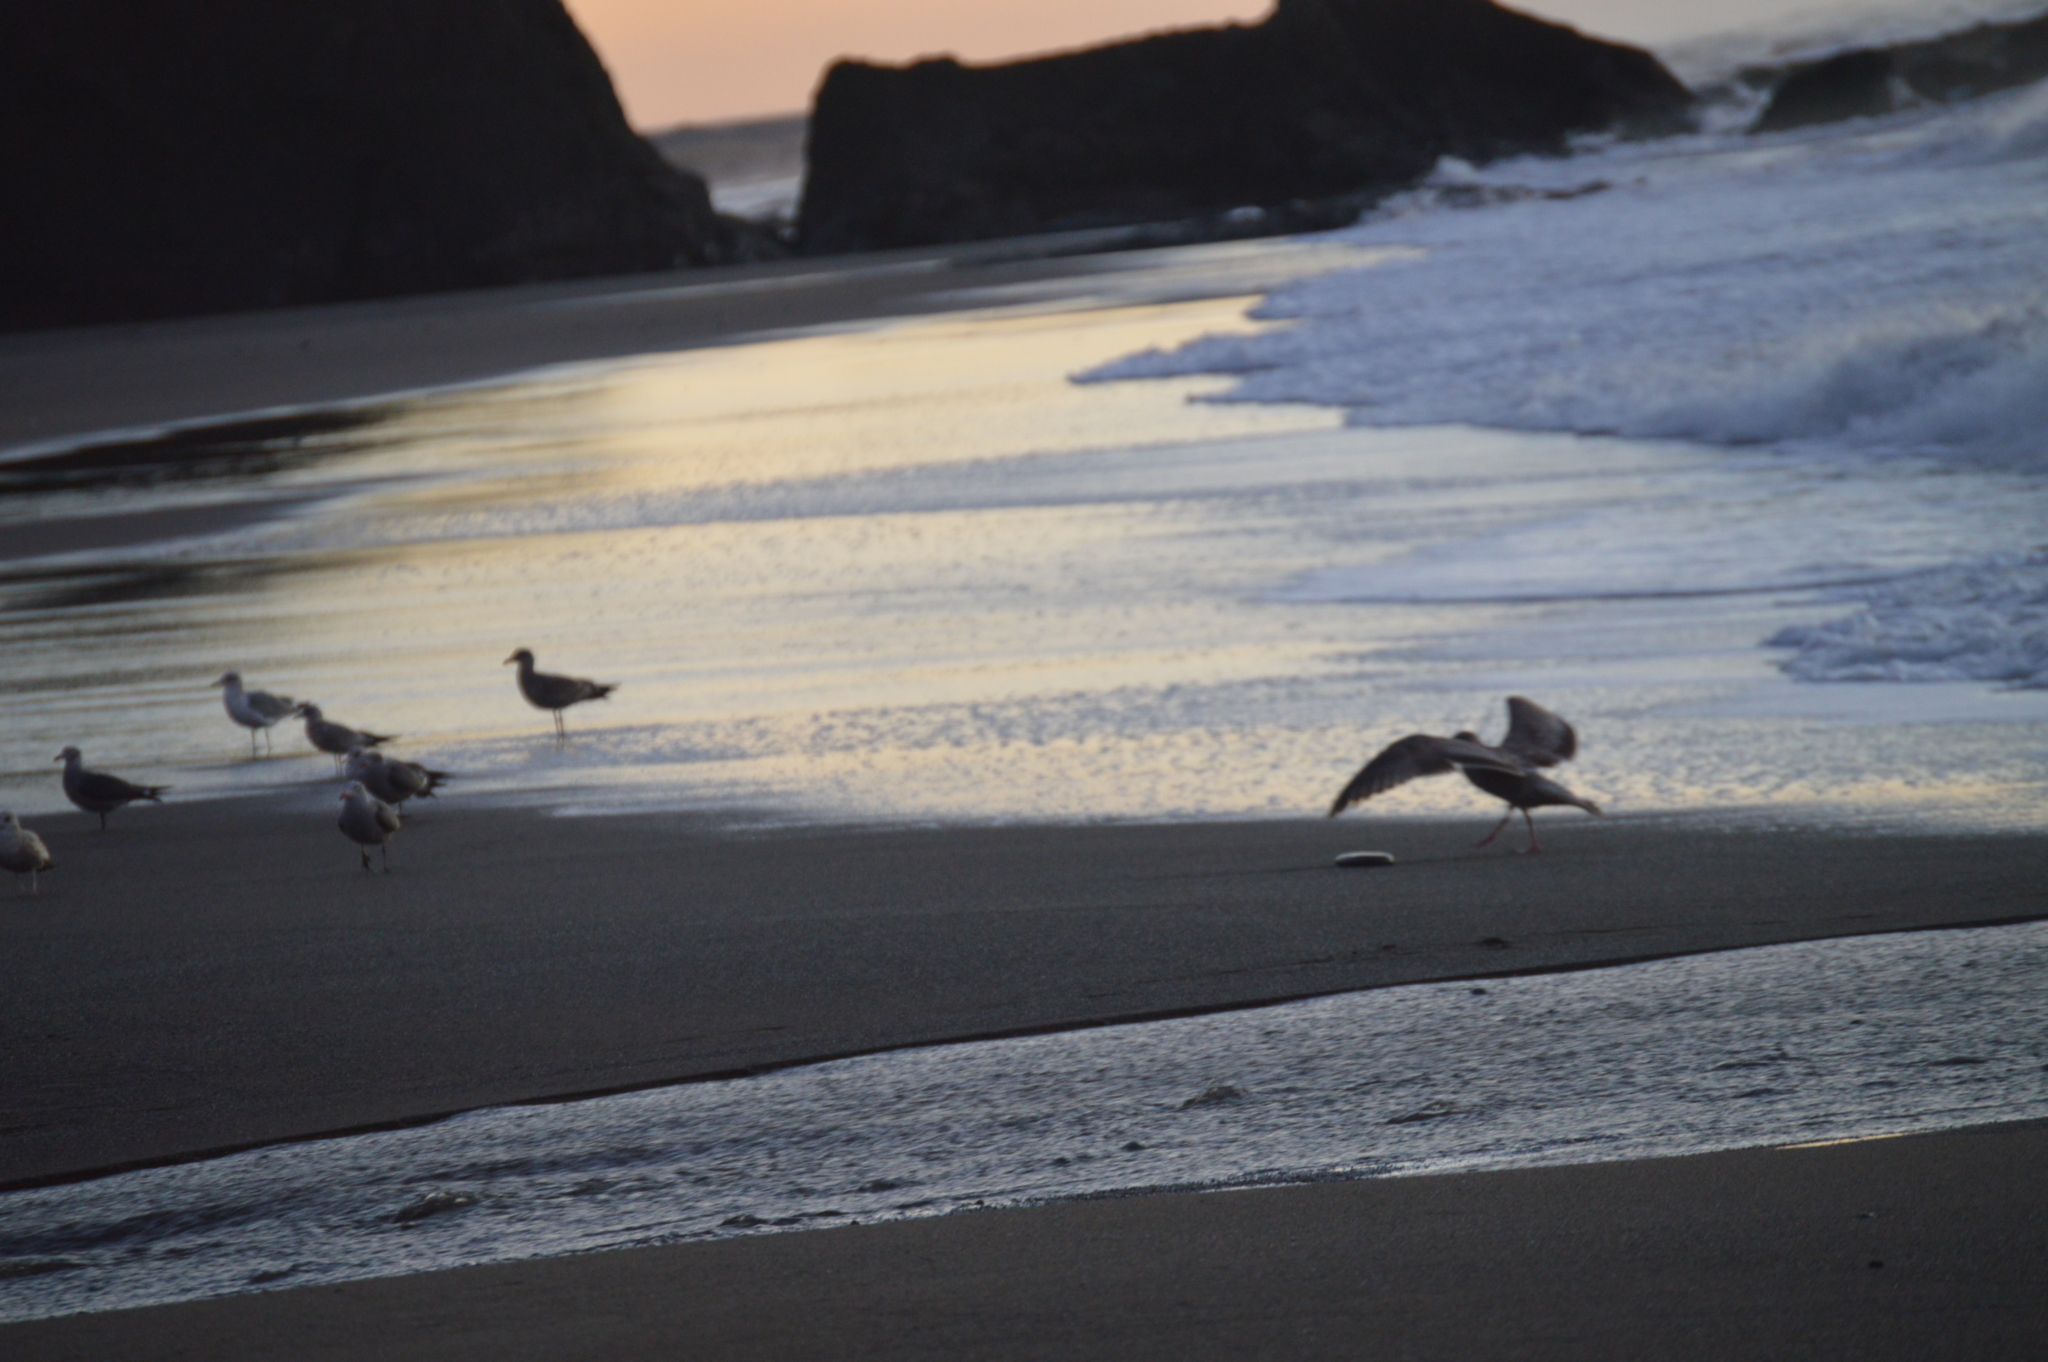 Group of seagulls standing on sandy beach at sunset